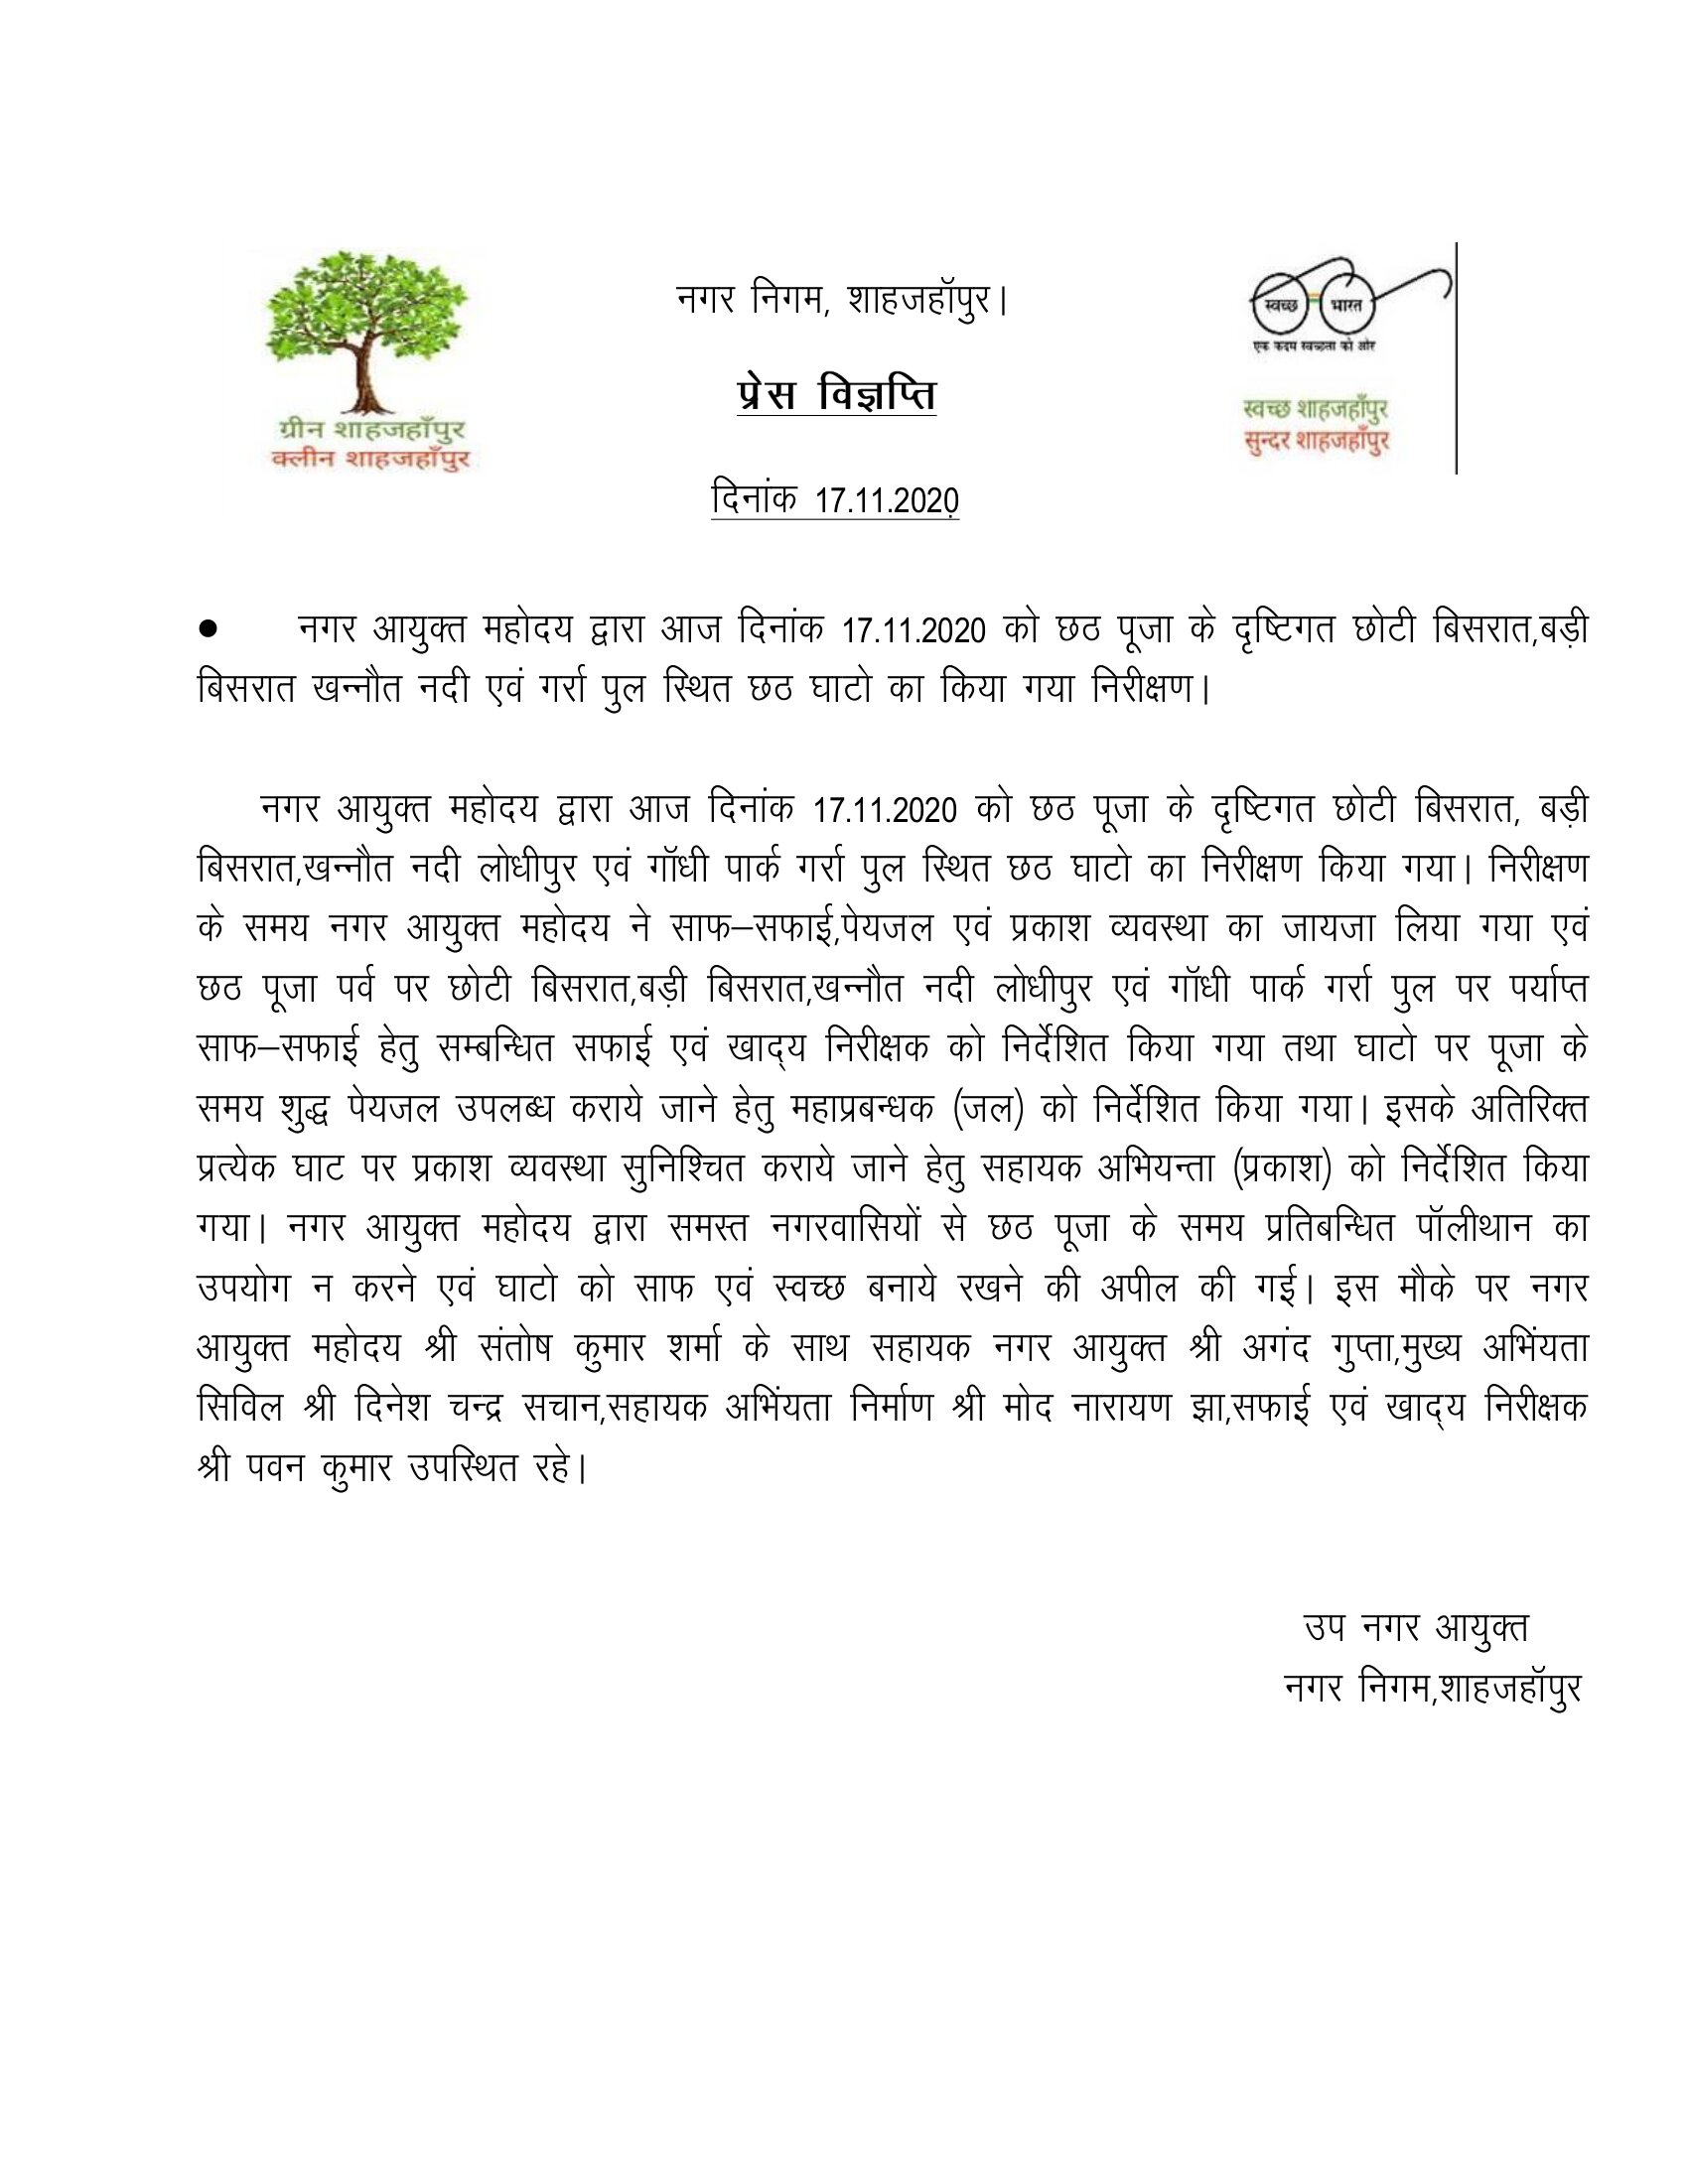 Regarding inspection of  Ghats located at Chhoti Bisrat, Bari Bisrat, Khannout River  and Garrah Bridge on 17.11.2020 on the occasion of Chhath Puja by City Commissioner